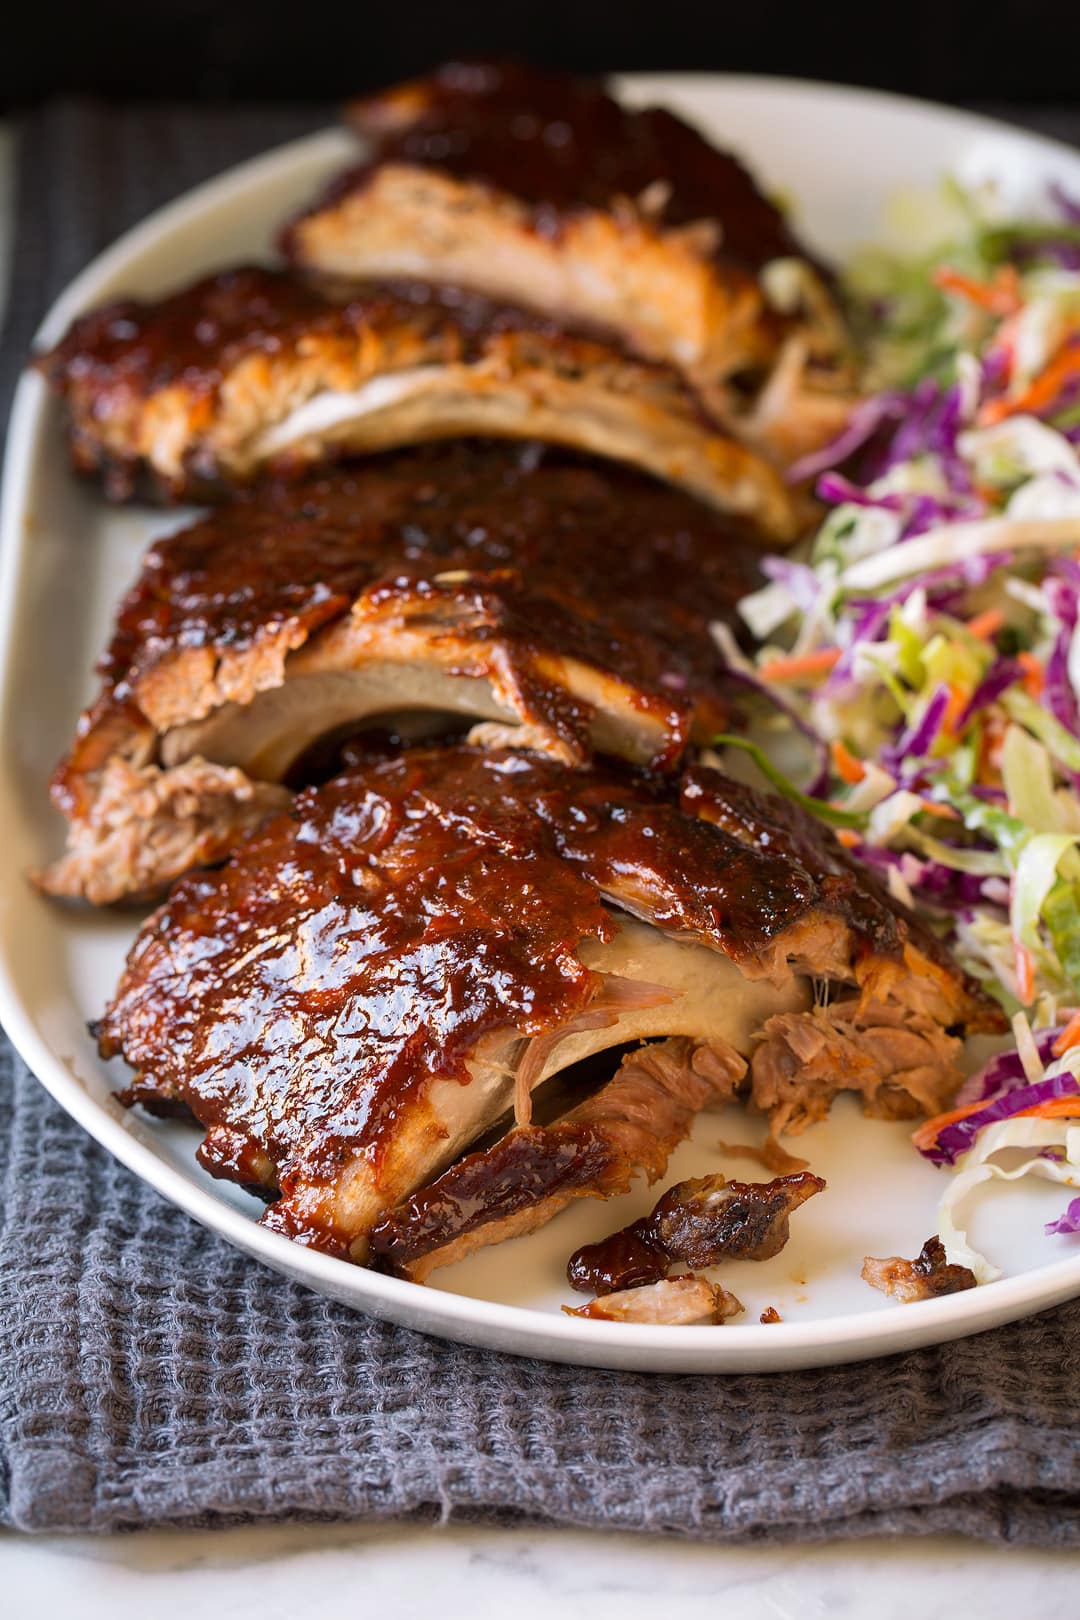 Slow-Cooked Ribs finished on Barbecue